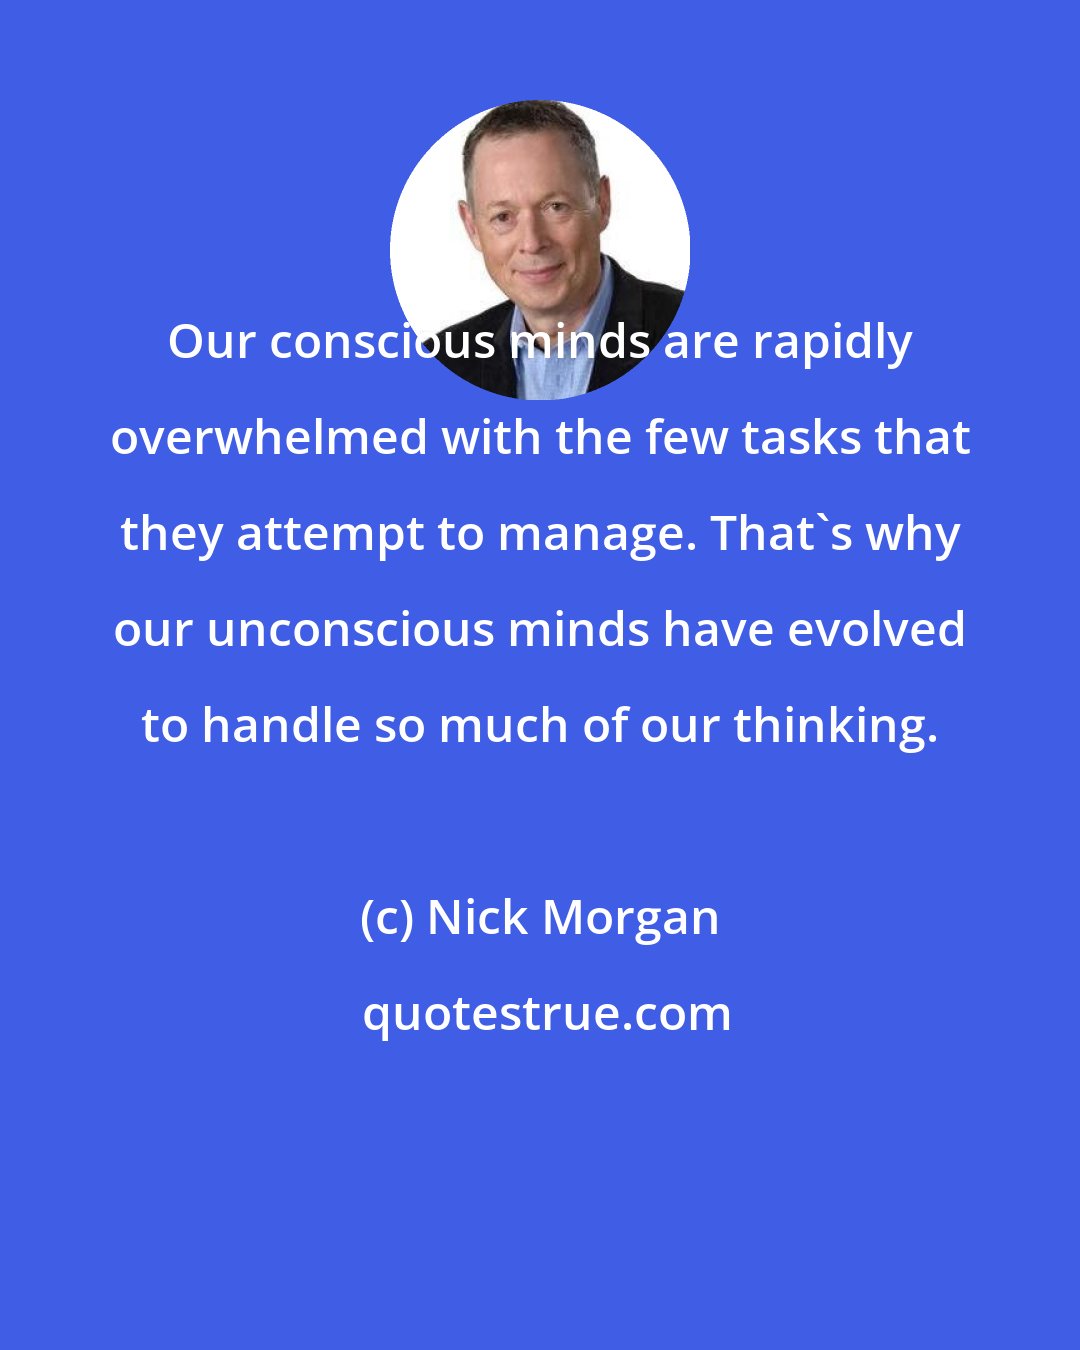 Nick Morgan: Our conscious minds are rapidly overwhelmed with the few tasks that they attempt to manage. That's why our unconscious minds have evolved to handle so much of our thinking.